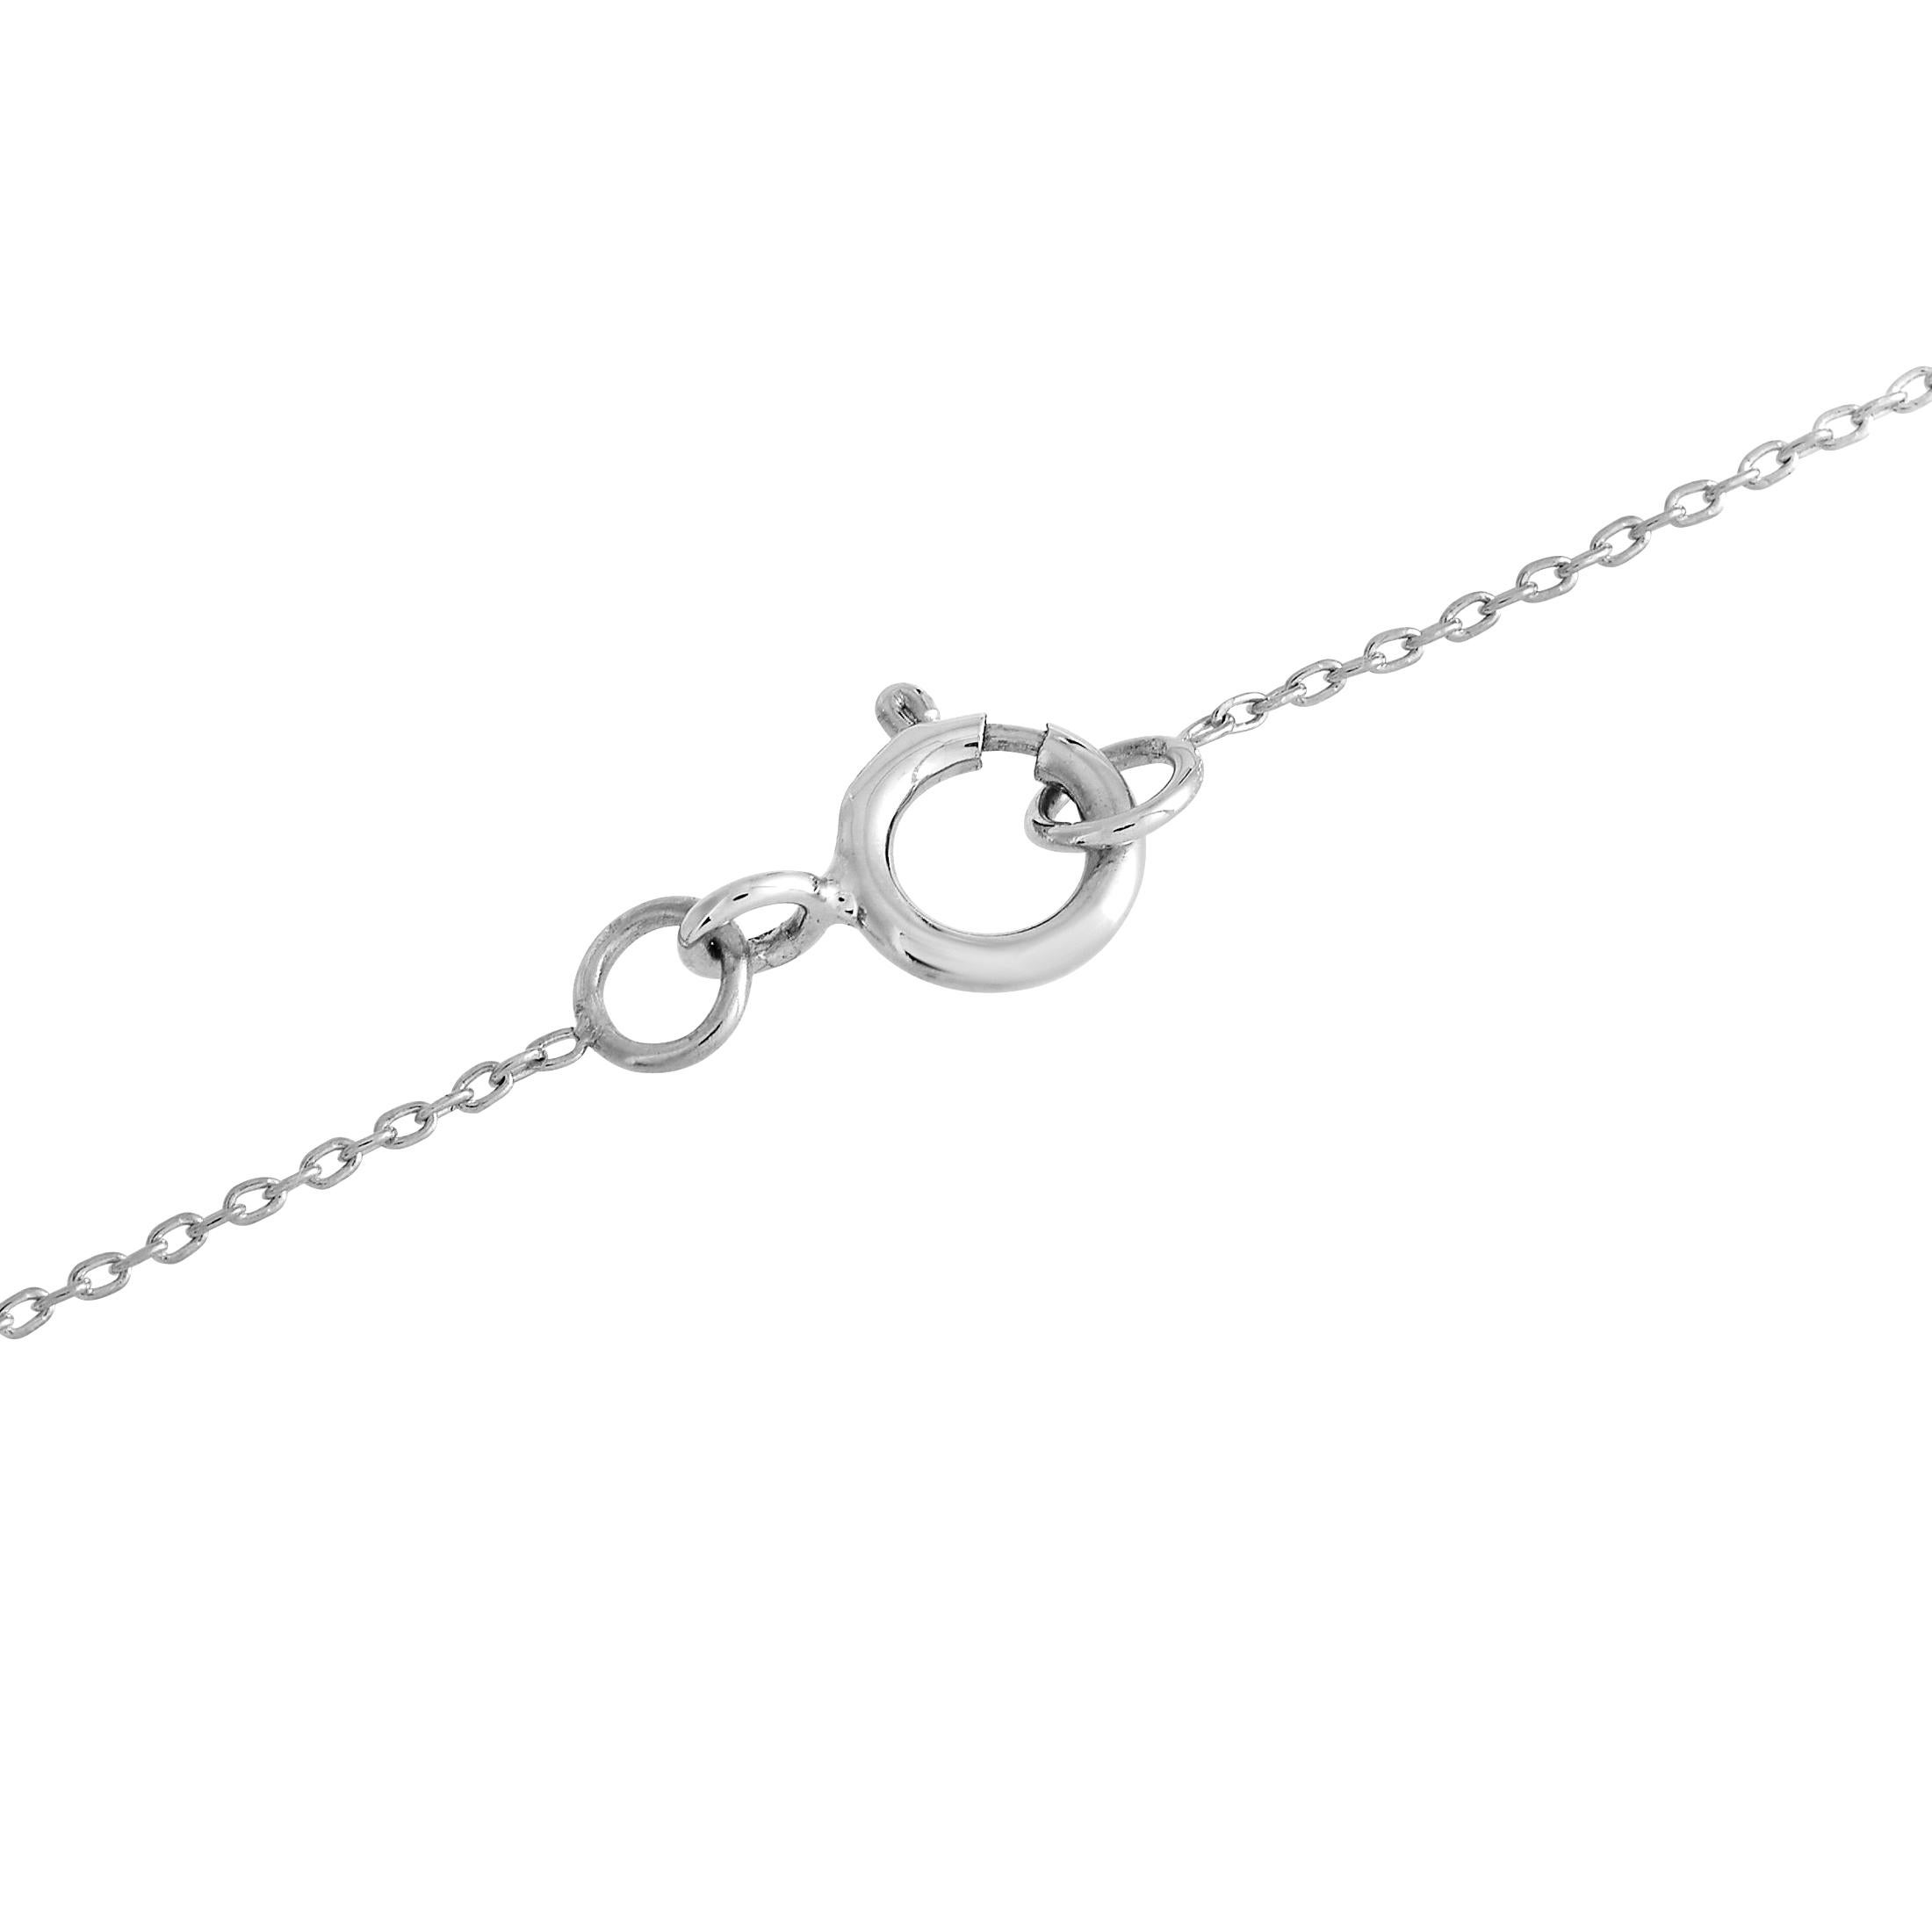 Round Cut LB Exclusive 14K White Gold 0.17ct Diamond Safety Pin Necklace PD4-16188W For Sale